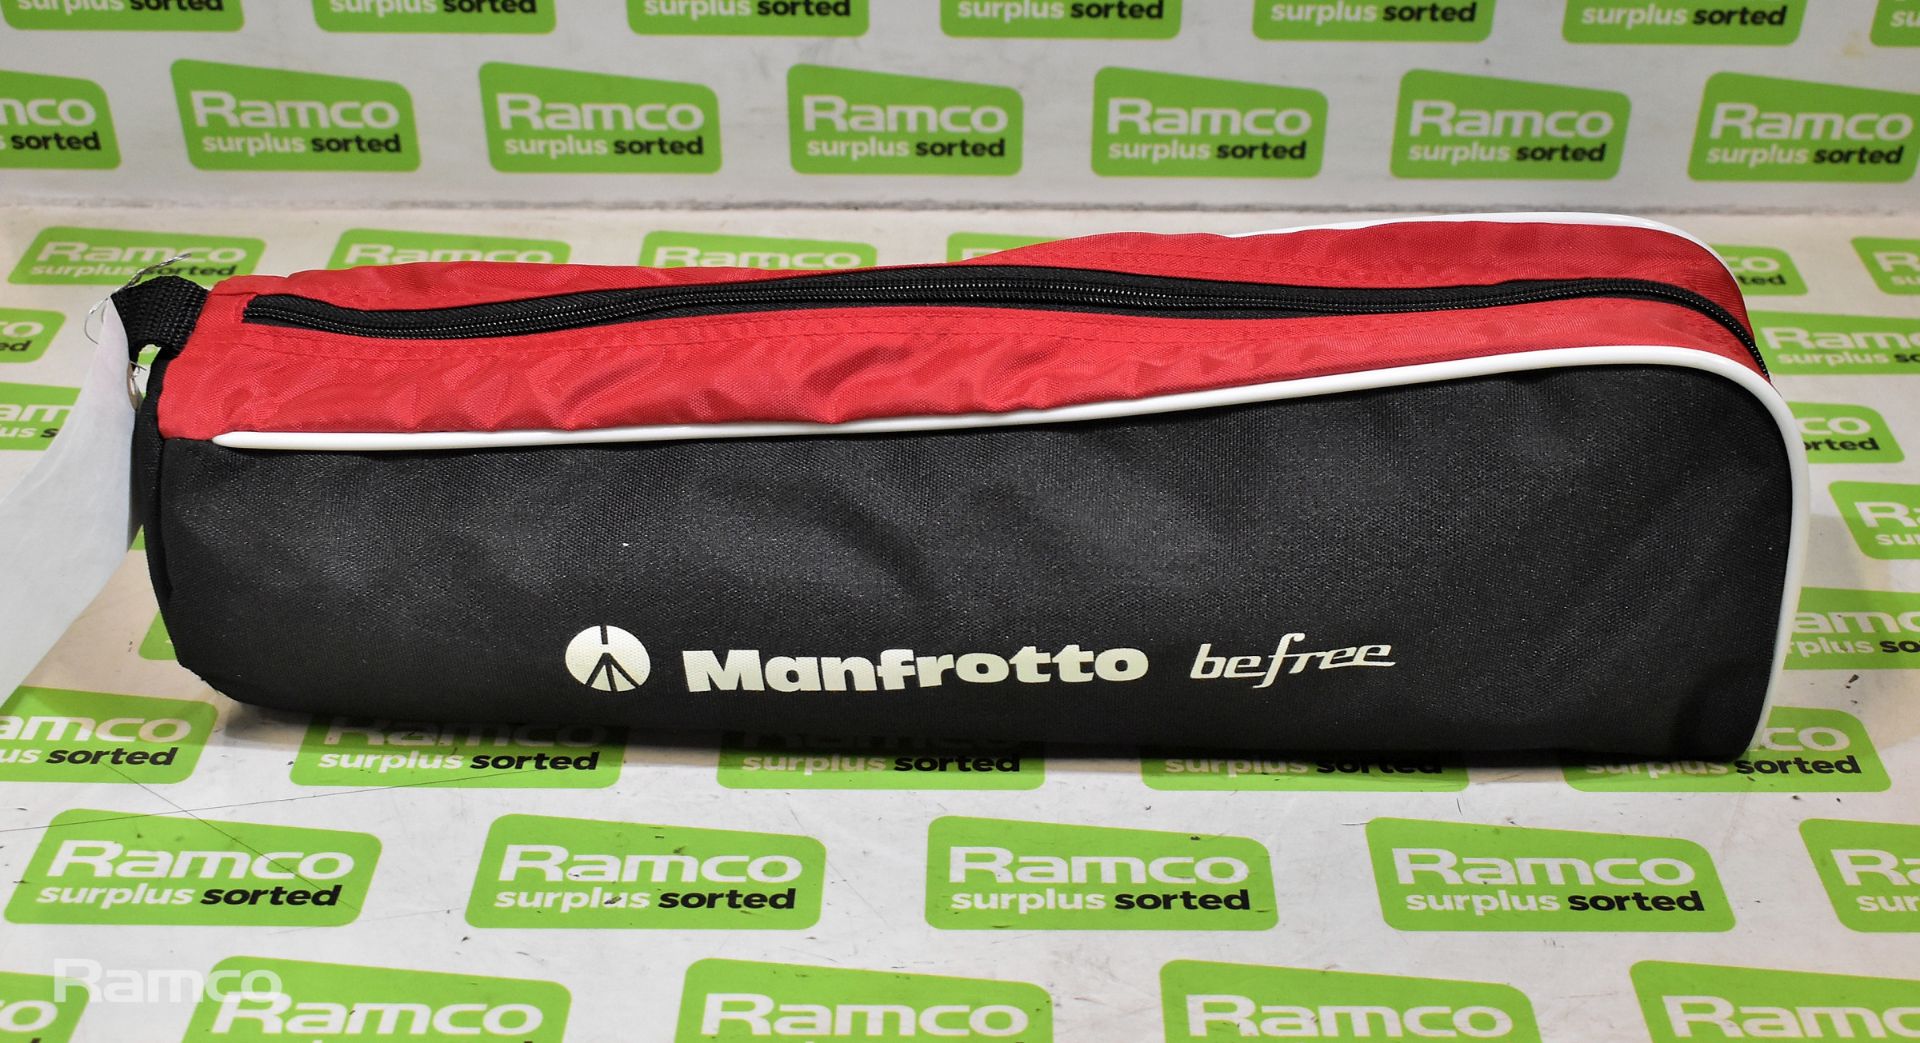 Manfrotto Befree Advanced ball head tripod with telescopic legs in carry bag - Image 6 of 6